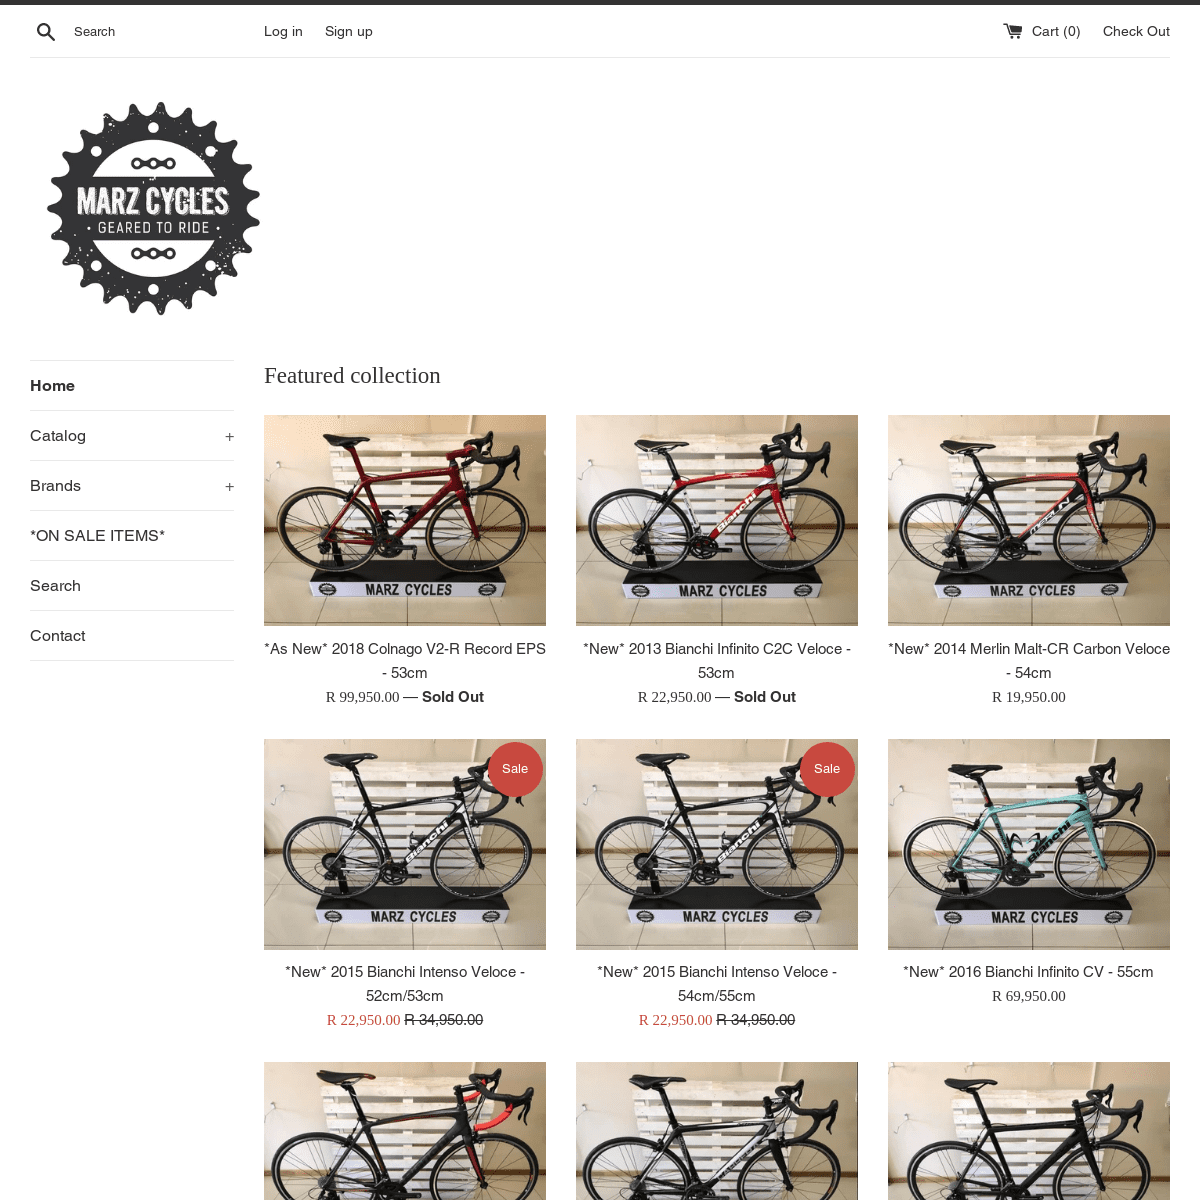 A complete backup of marzcycles.com